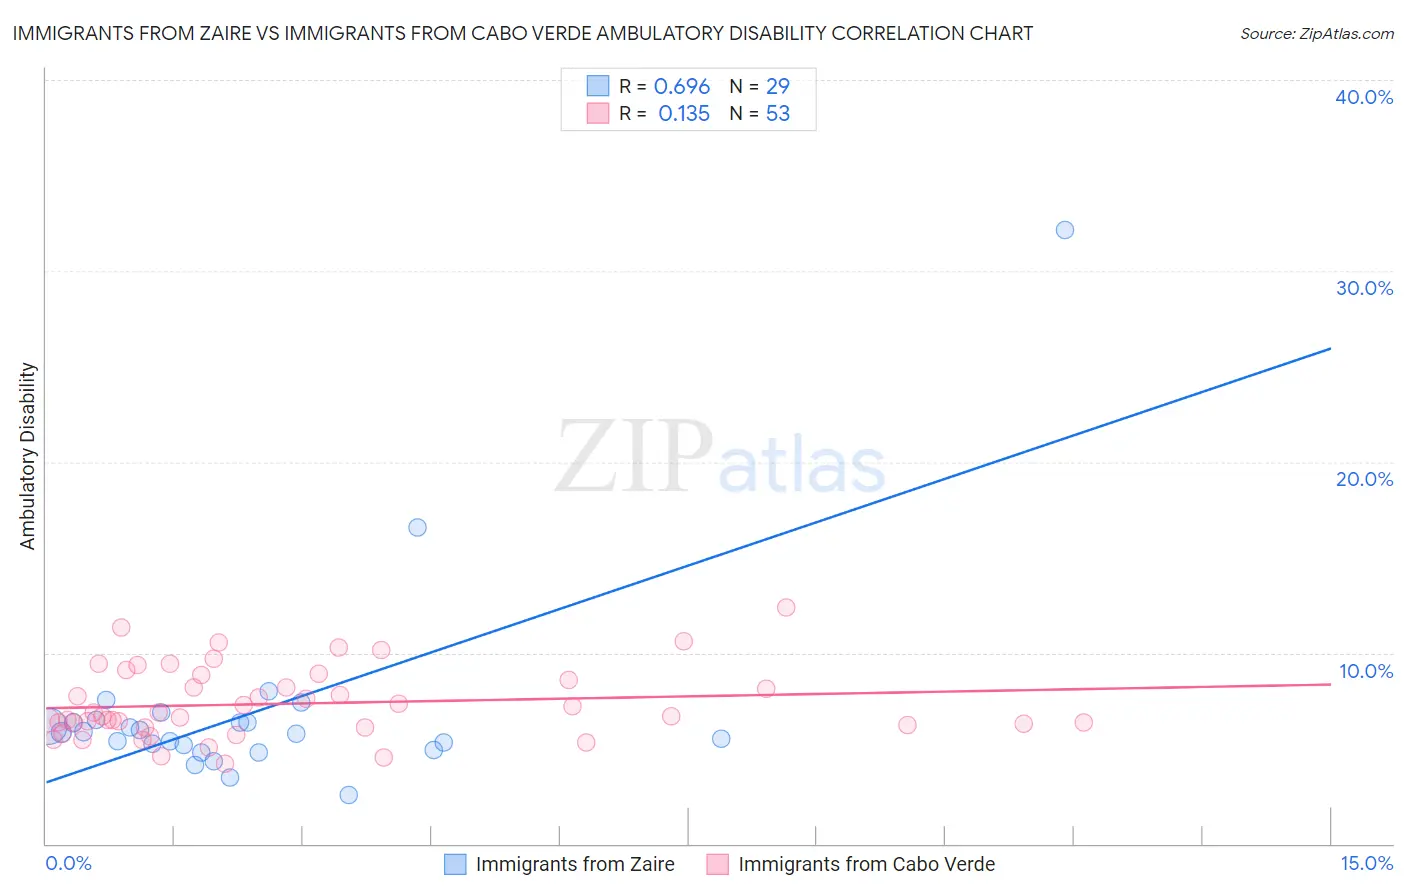 Immigrants from Zaire vs Immigrants from Cabo Verde Ambulatory Disability